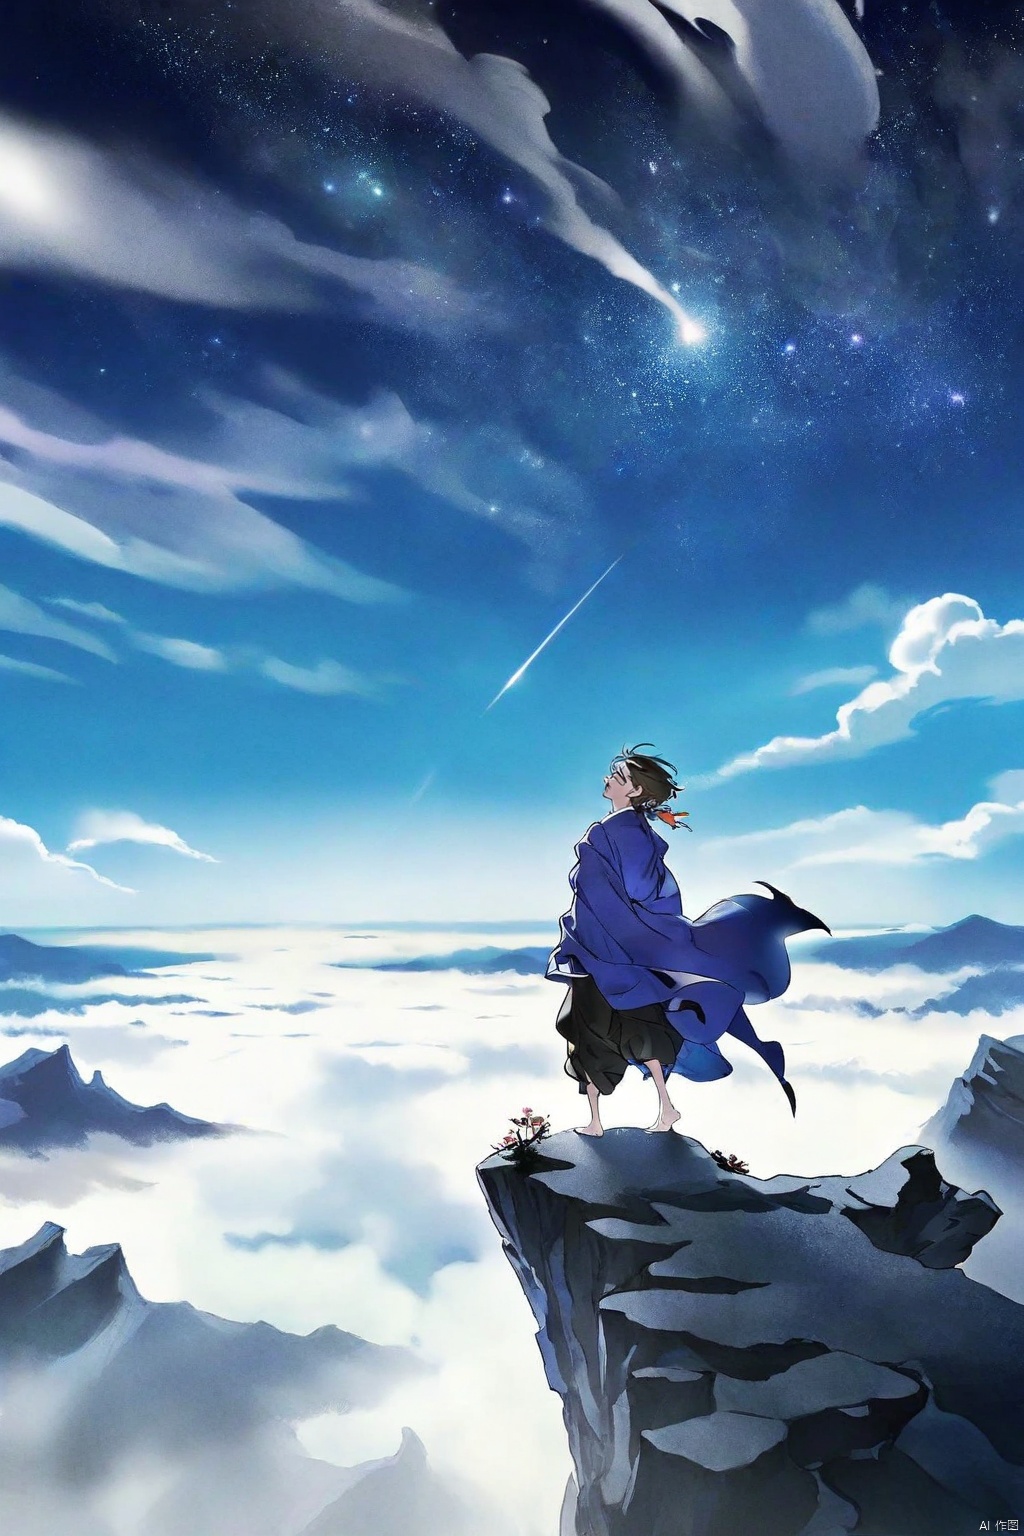 by yoneyama mai,by mika pikazo, celestial whimsy: A solitary figure stands on a windswept cliff, wistfulness etched on his face as he gazes upon the boundless starry expanse. His hair flows like wisps of cloud, robe billowing behind him. The sky above twinkles with rotating galaxies and constellations, casting an otherworldly glow. Tie-dye colors swirl in a cosmic dance, illuminated by ethereal lights.